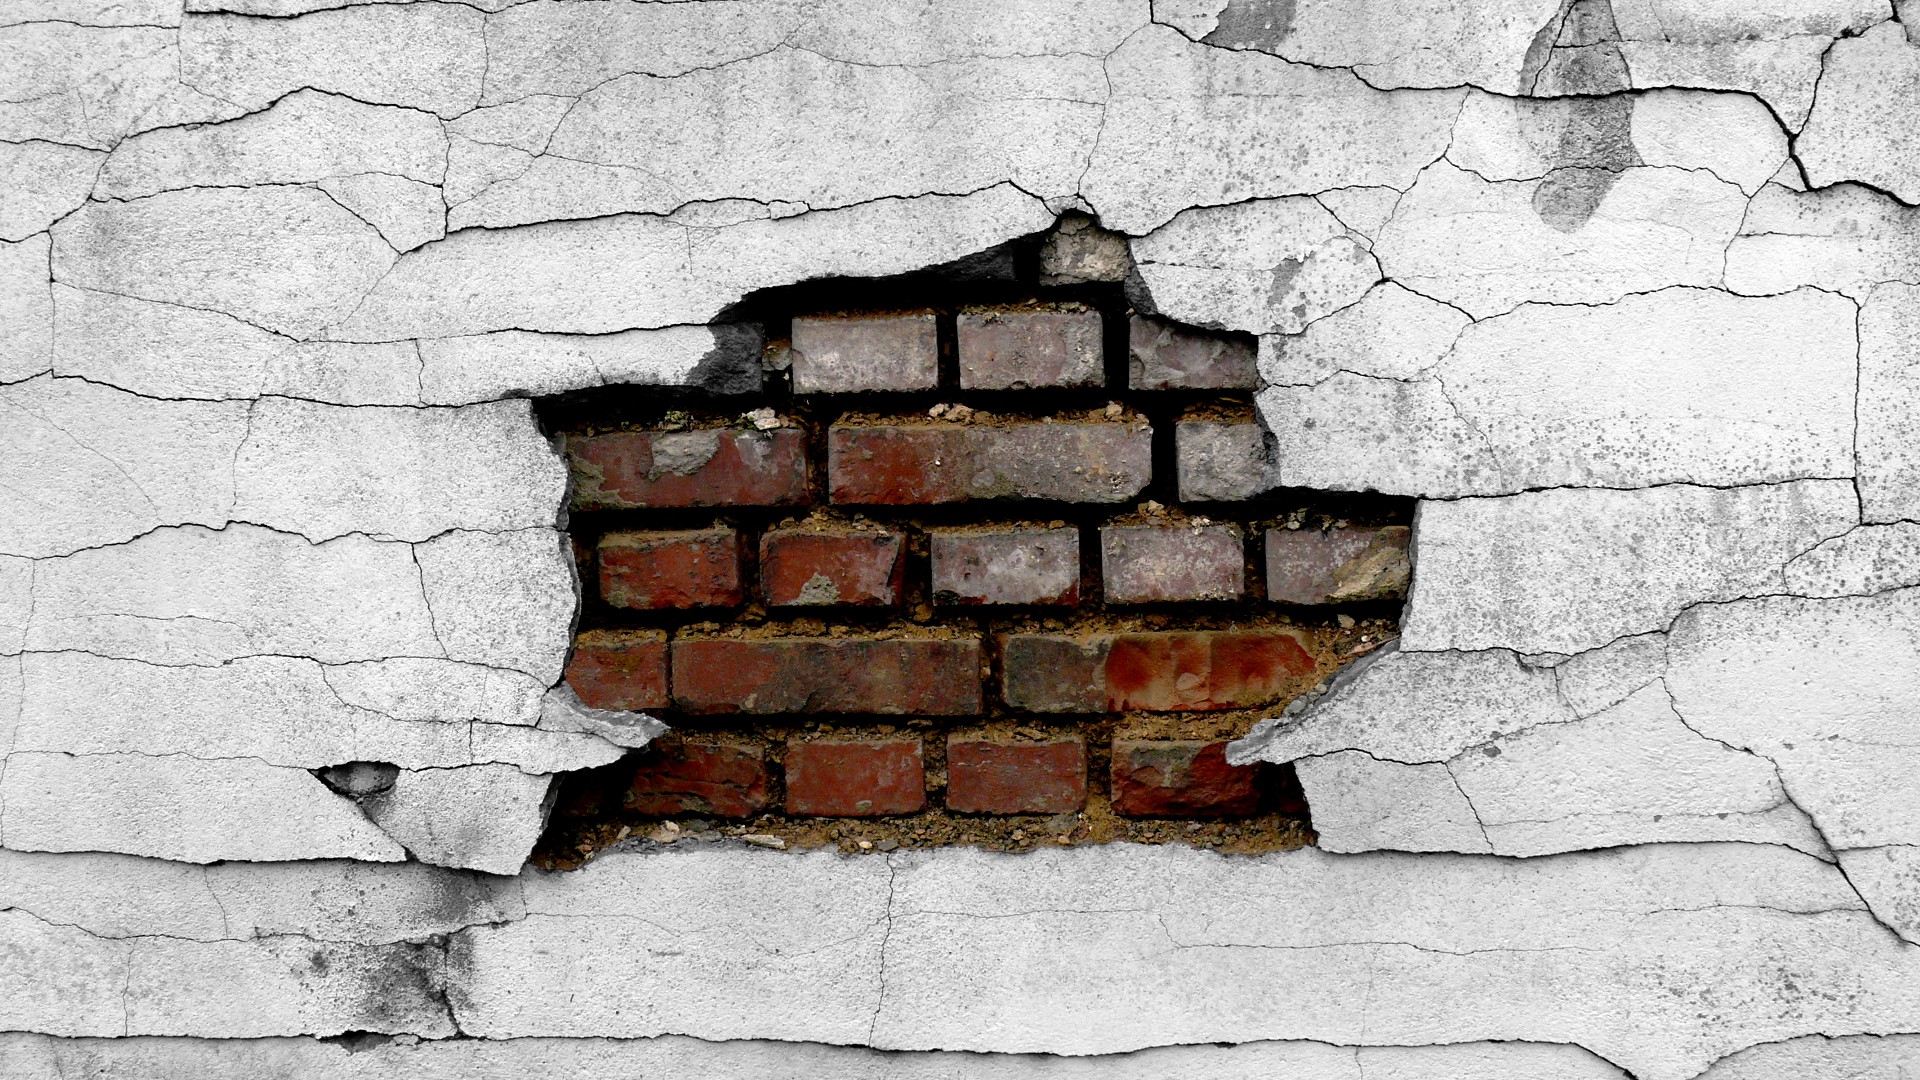 Free Download Wall Cracked Broken Brick Wall Wallpaper 1920x1080 48640 1920x1080 For Your Desktop Mobile Tablet Explore 50 Damaged Walls From Wallpaper Removal Easy Wallpaper Removal Wallpaper Removal Solution Wallpaper Removal Tips - wall cracks roblox